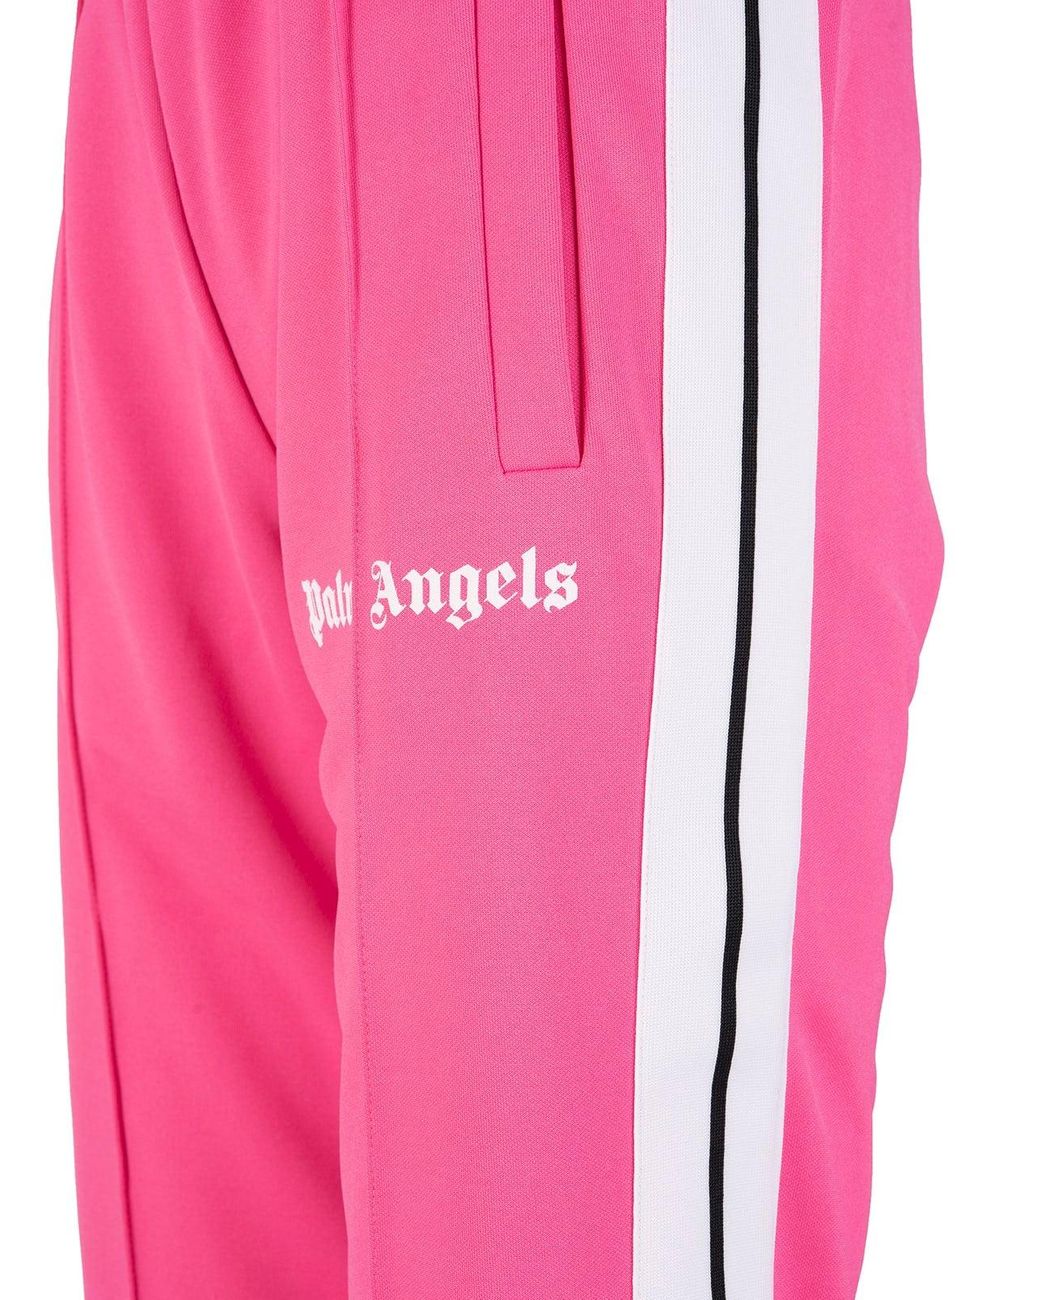 gym and workout clothes Palm Angels Activewear Womens Activewear - Save 57% Palm Angels Synthetic Straight-leg Track Pants in Fuchsia White gym and workout clothes Pink 